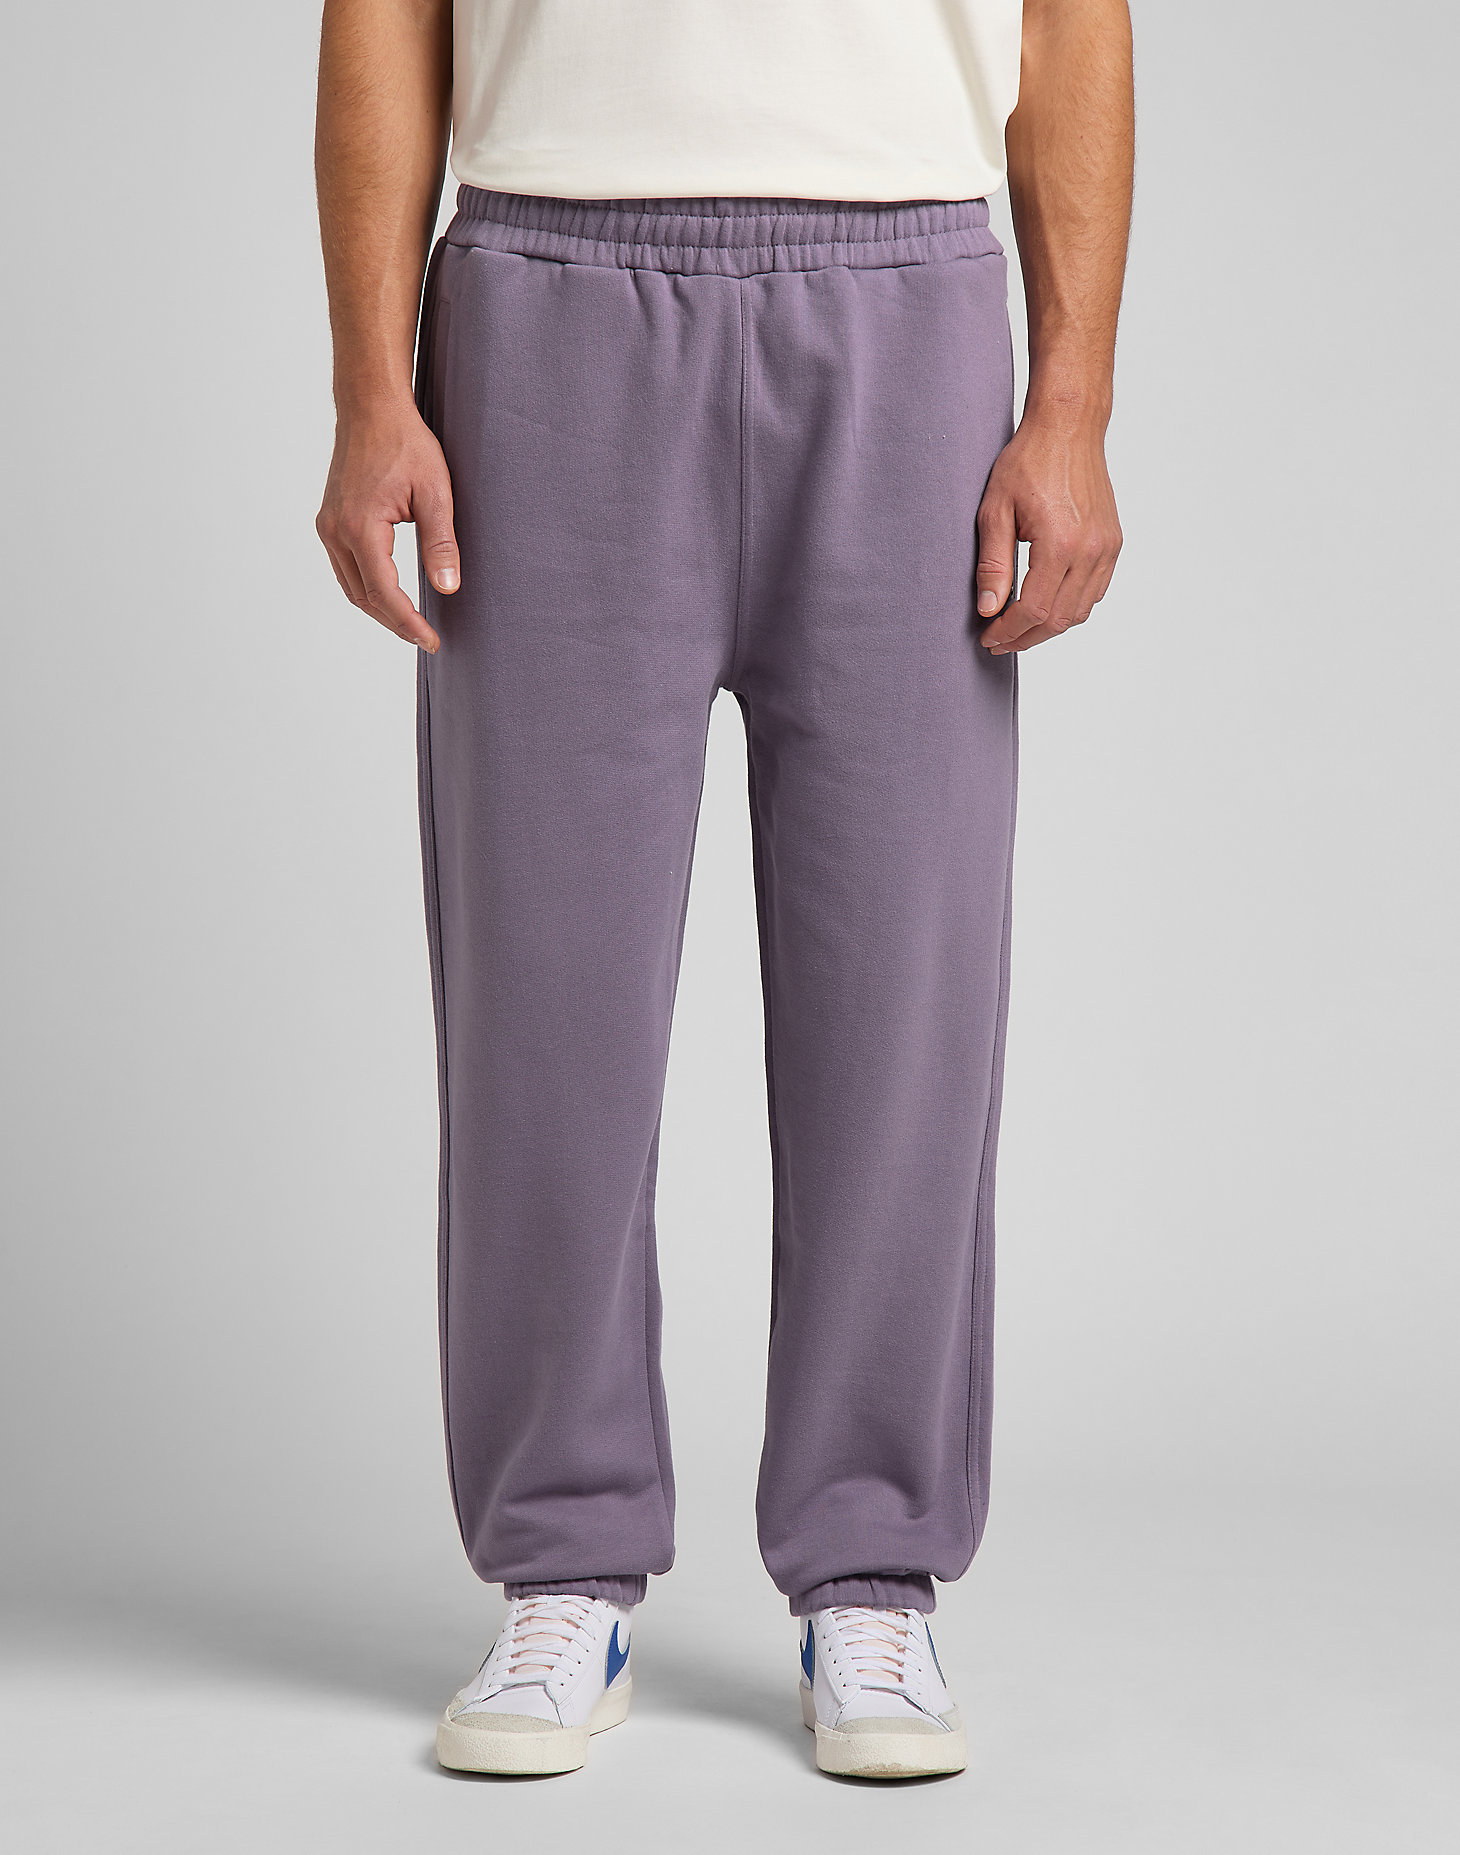 Sweat Pant in Washed Purple alternative view 3